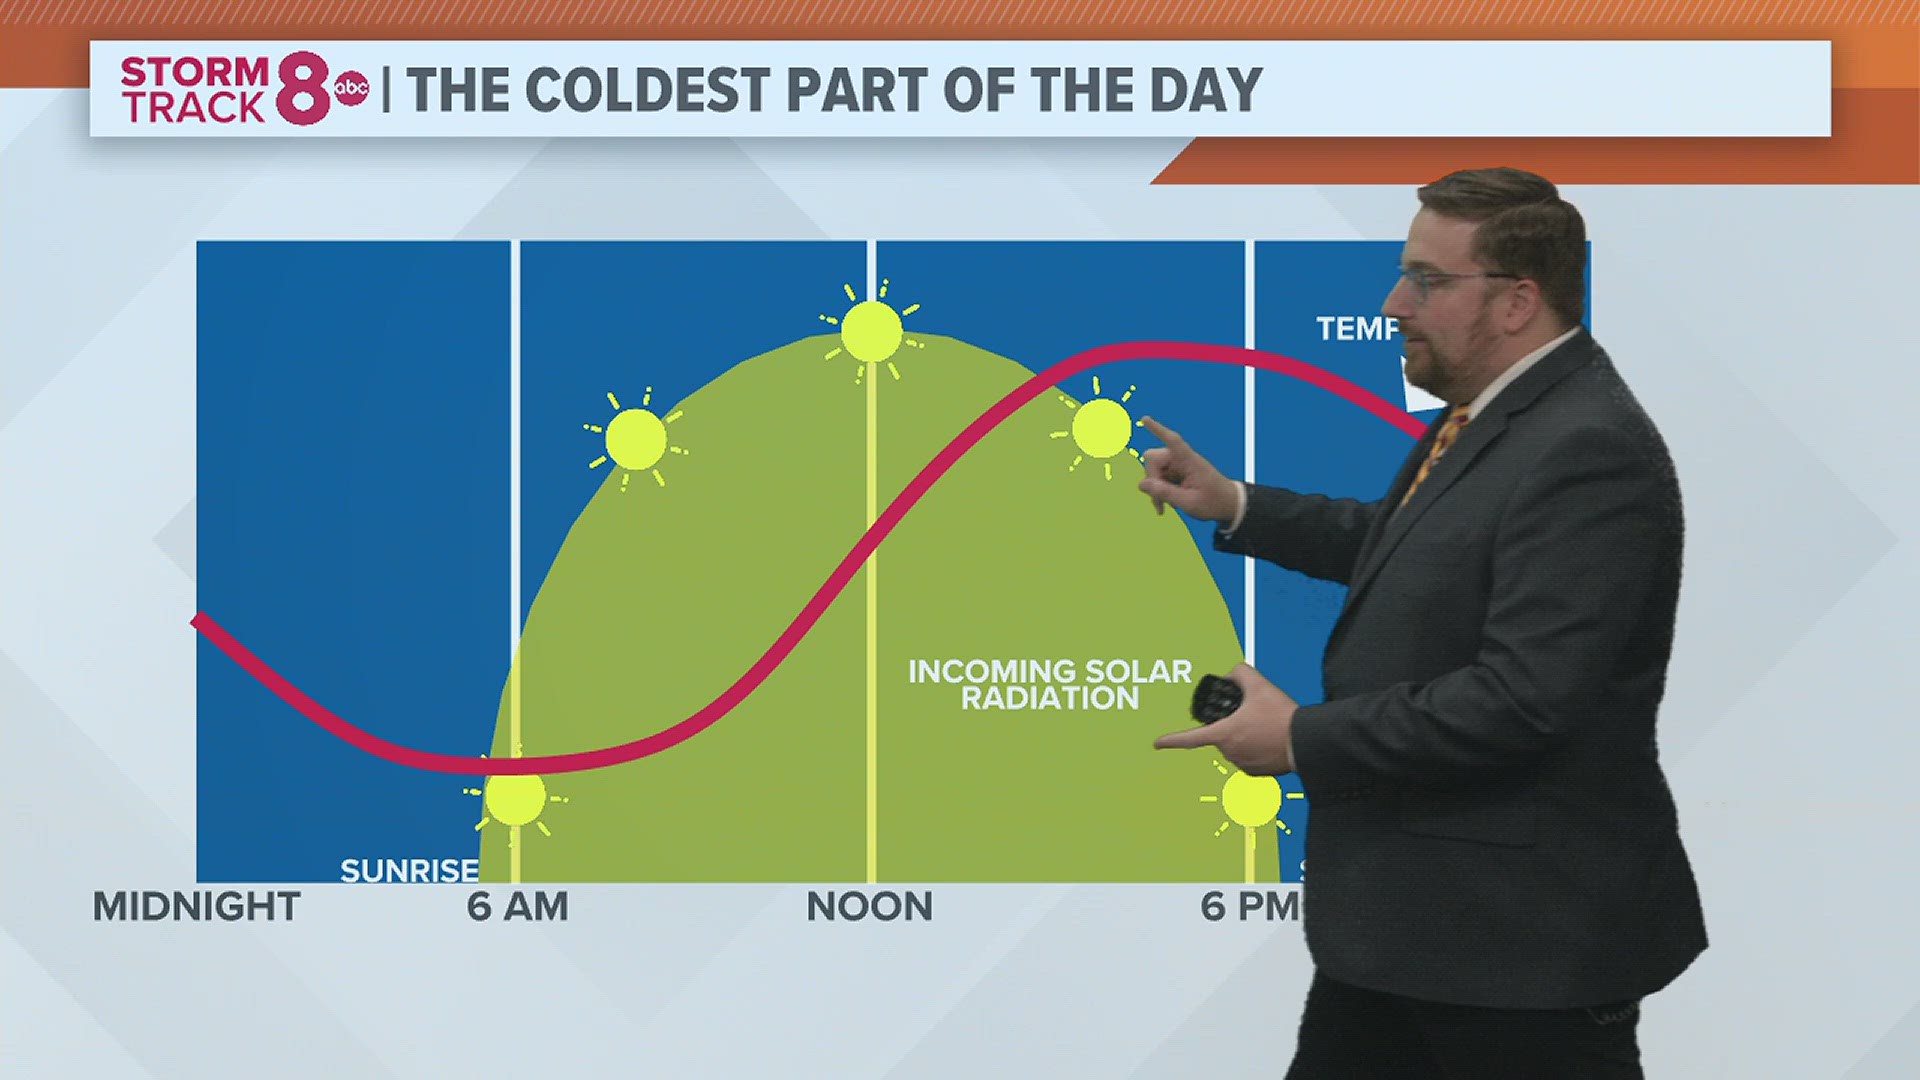 The sun is the biggest driver of our temperature pattern. Here's why the coldest part of the day is typically while the sun is rising.